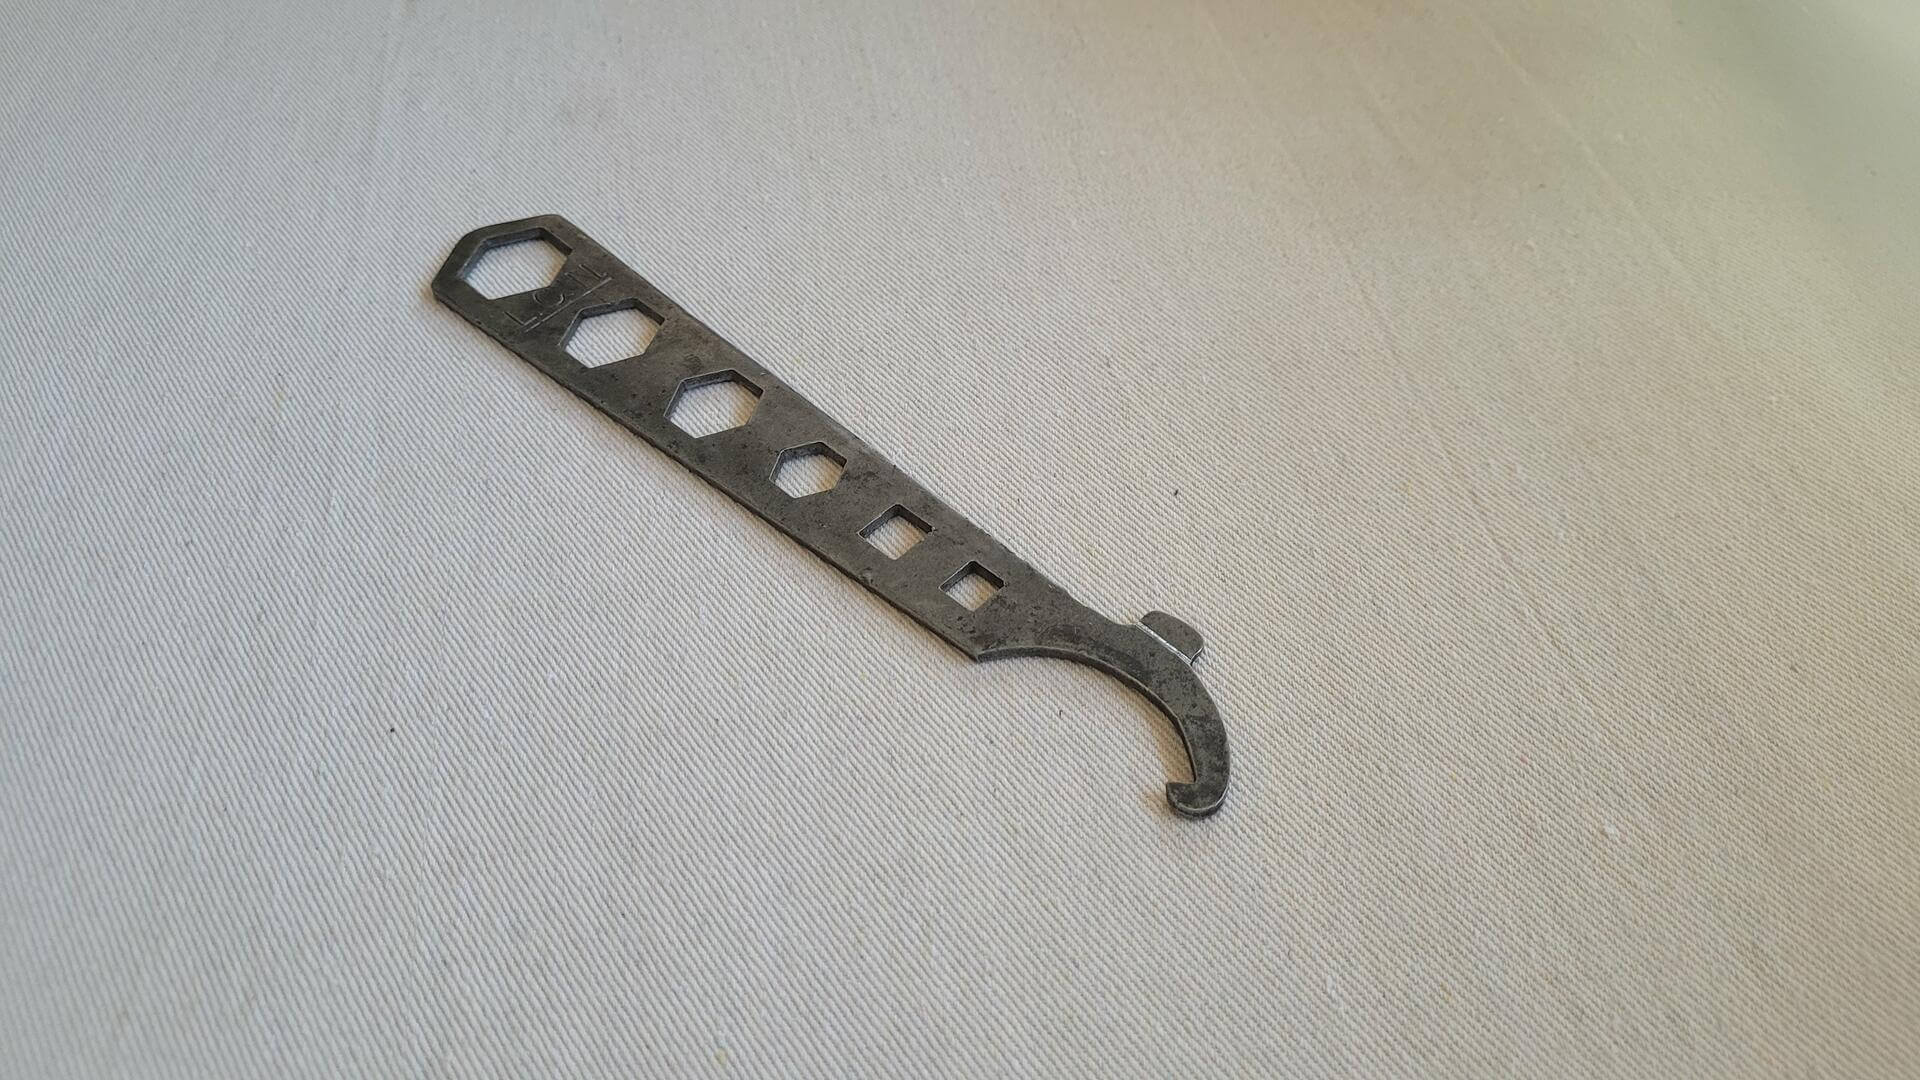 Antique L.C.N. 7 in 1 multi tool pot belly door closer wrench often mistaken and used as a bicycle spanner. Vintage made in USA collectible door hardware tools